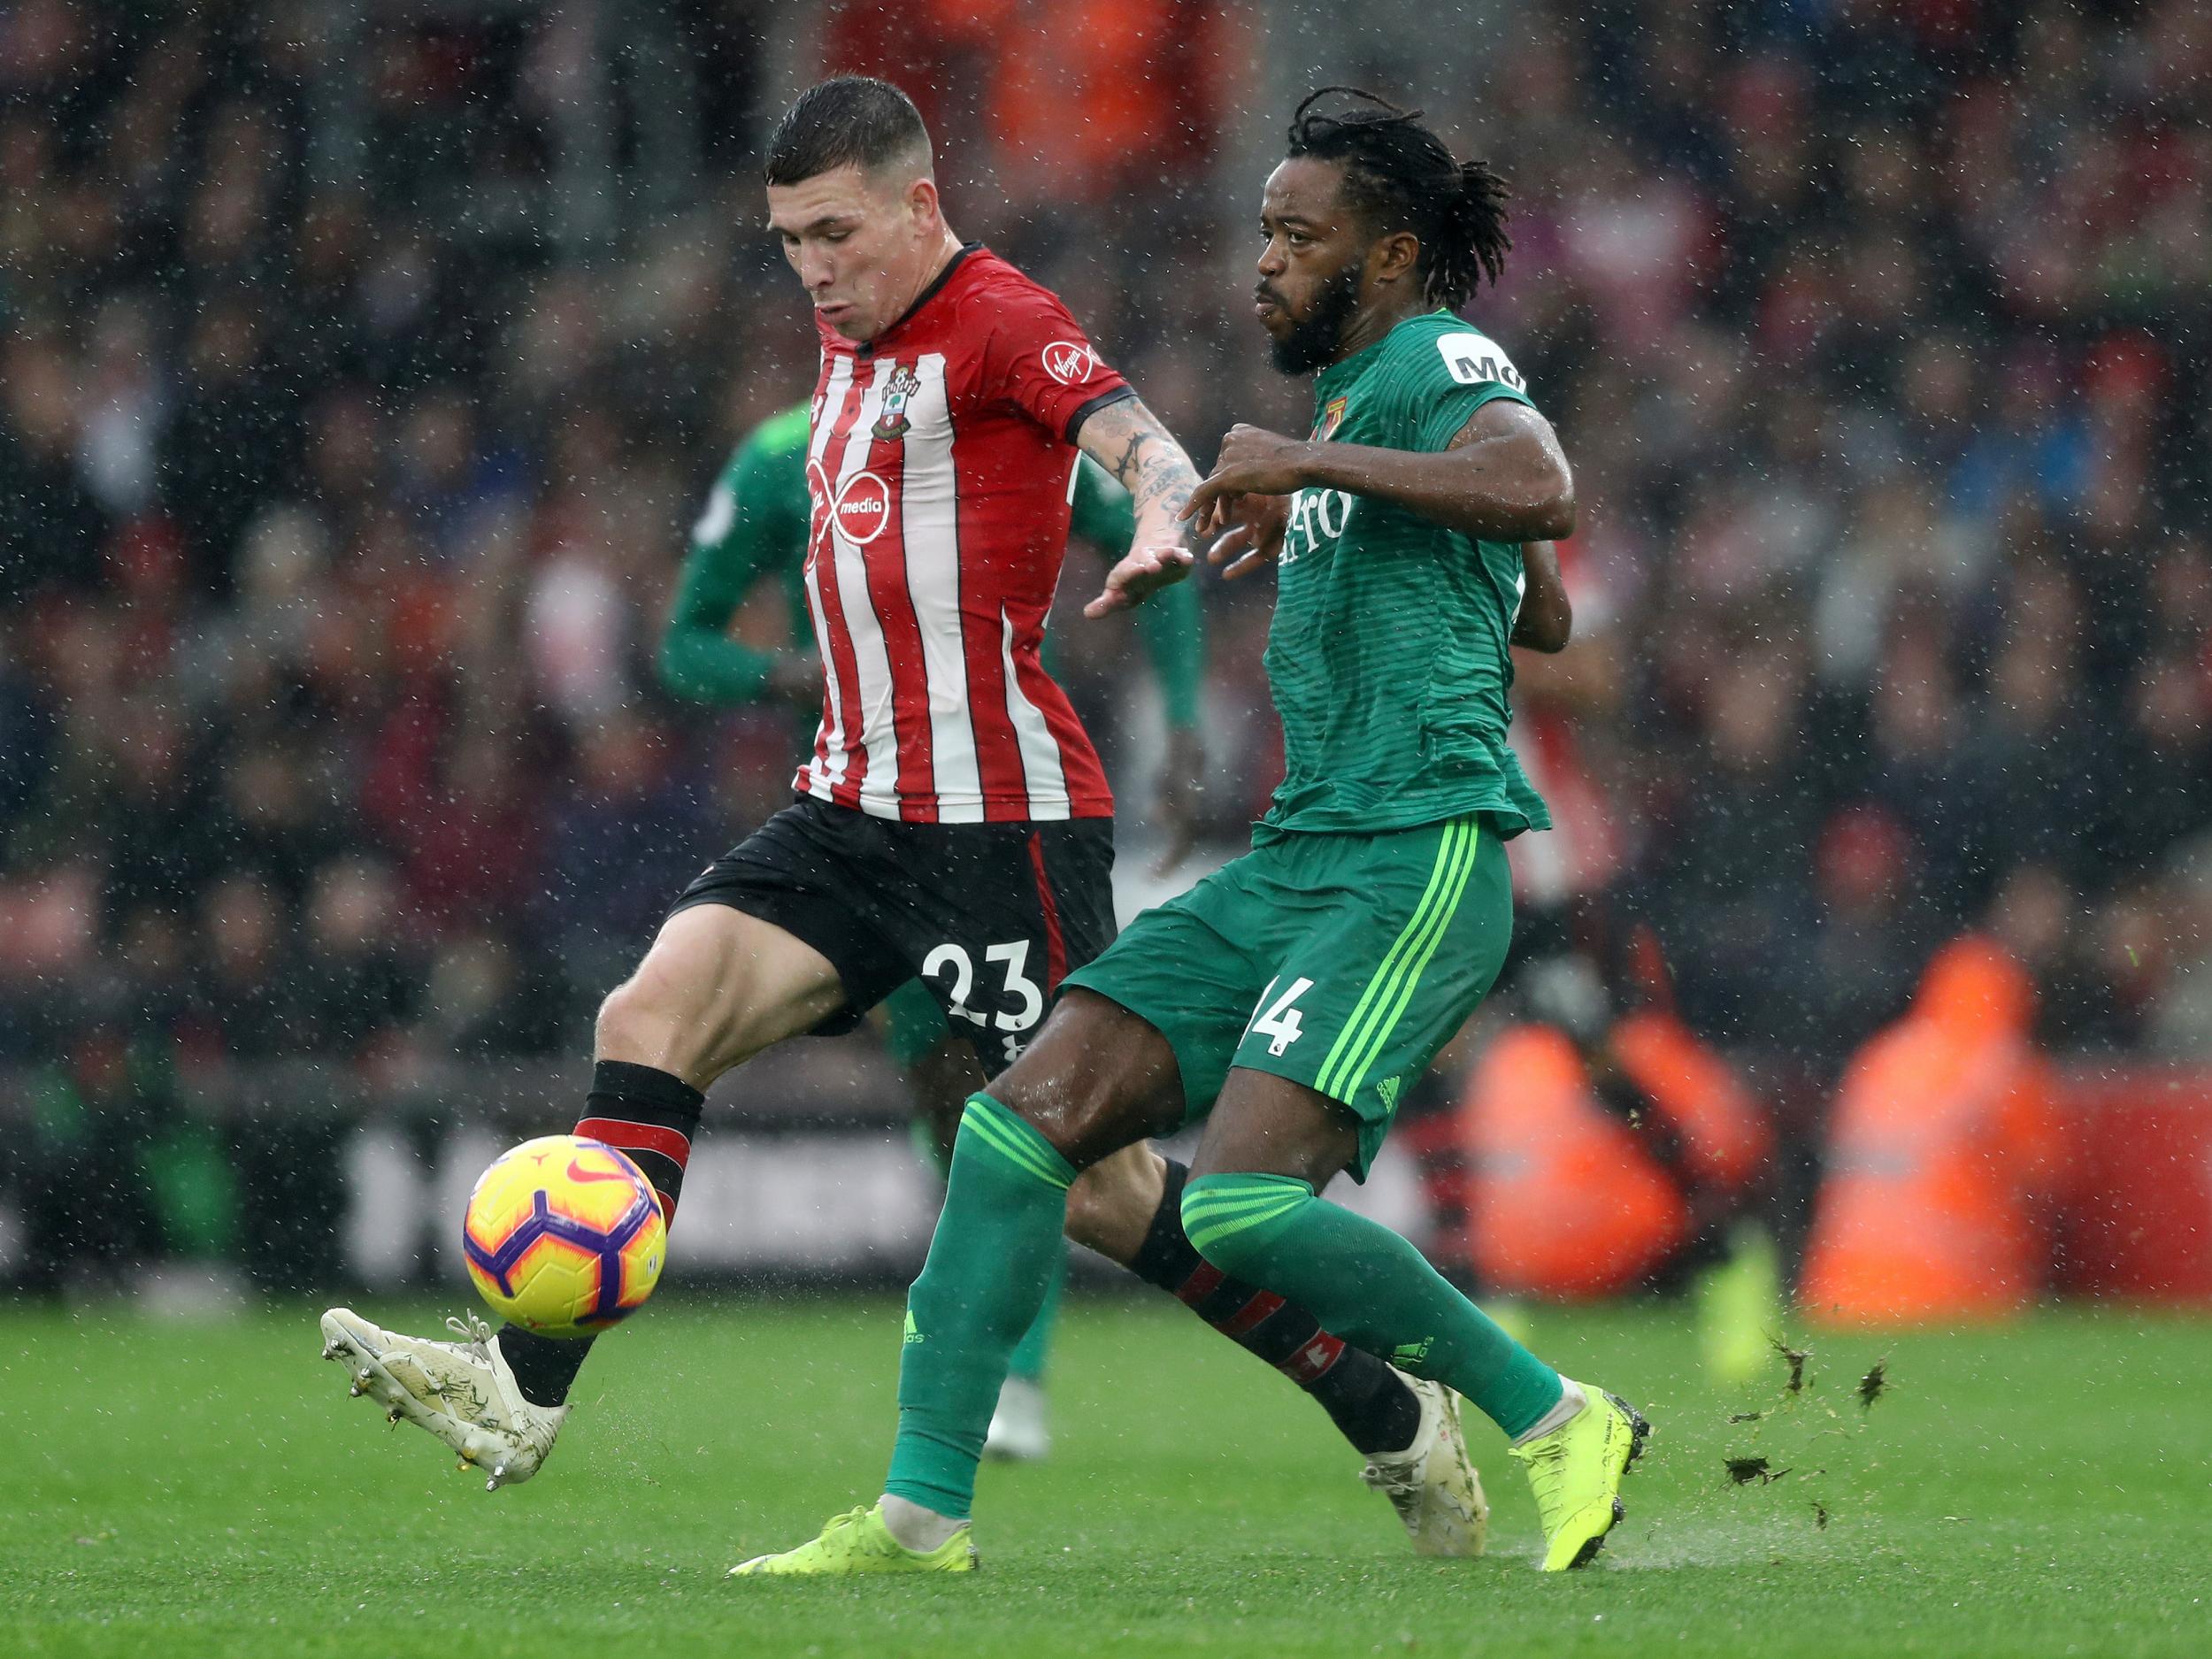 The Southampton midfielder insists the players do care